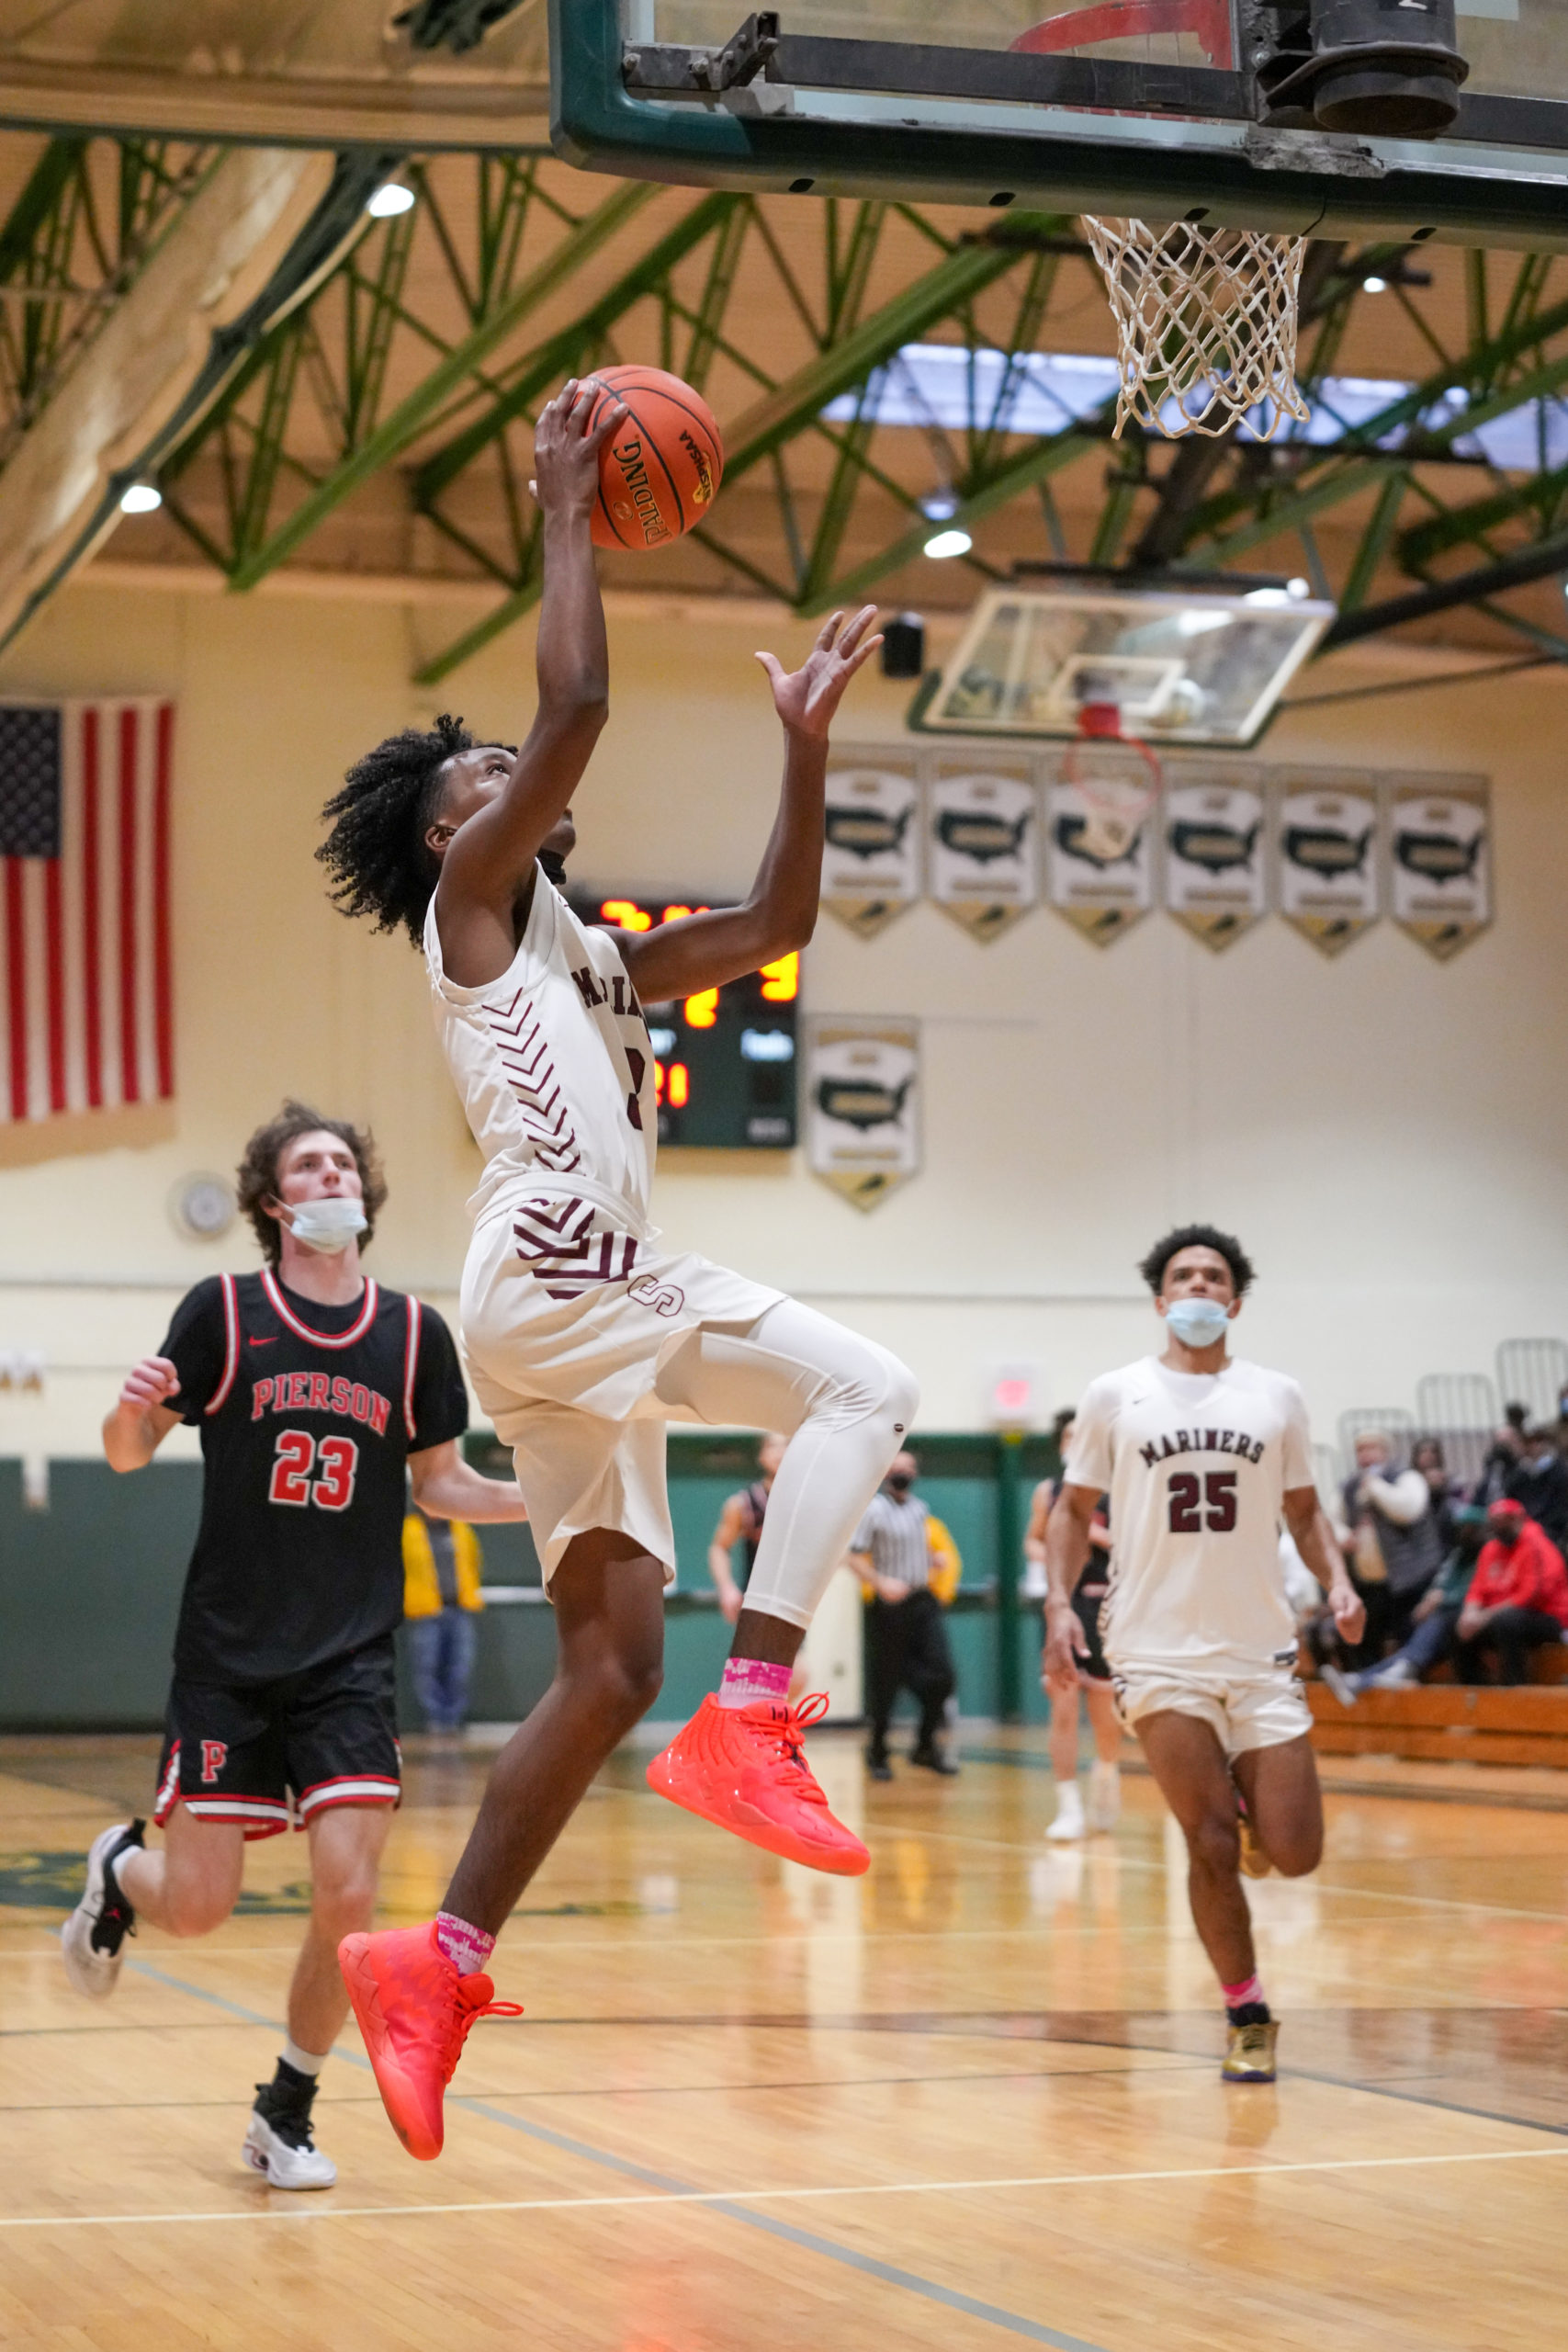 Southampton junior Derek Reed scored a game-high 31 points in Tuesday's victory over Pierson. RON ESPOSITO